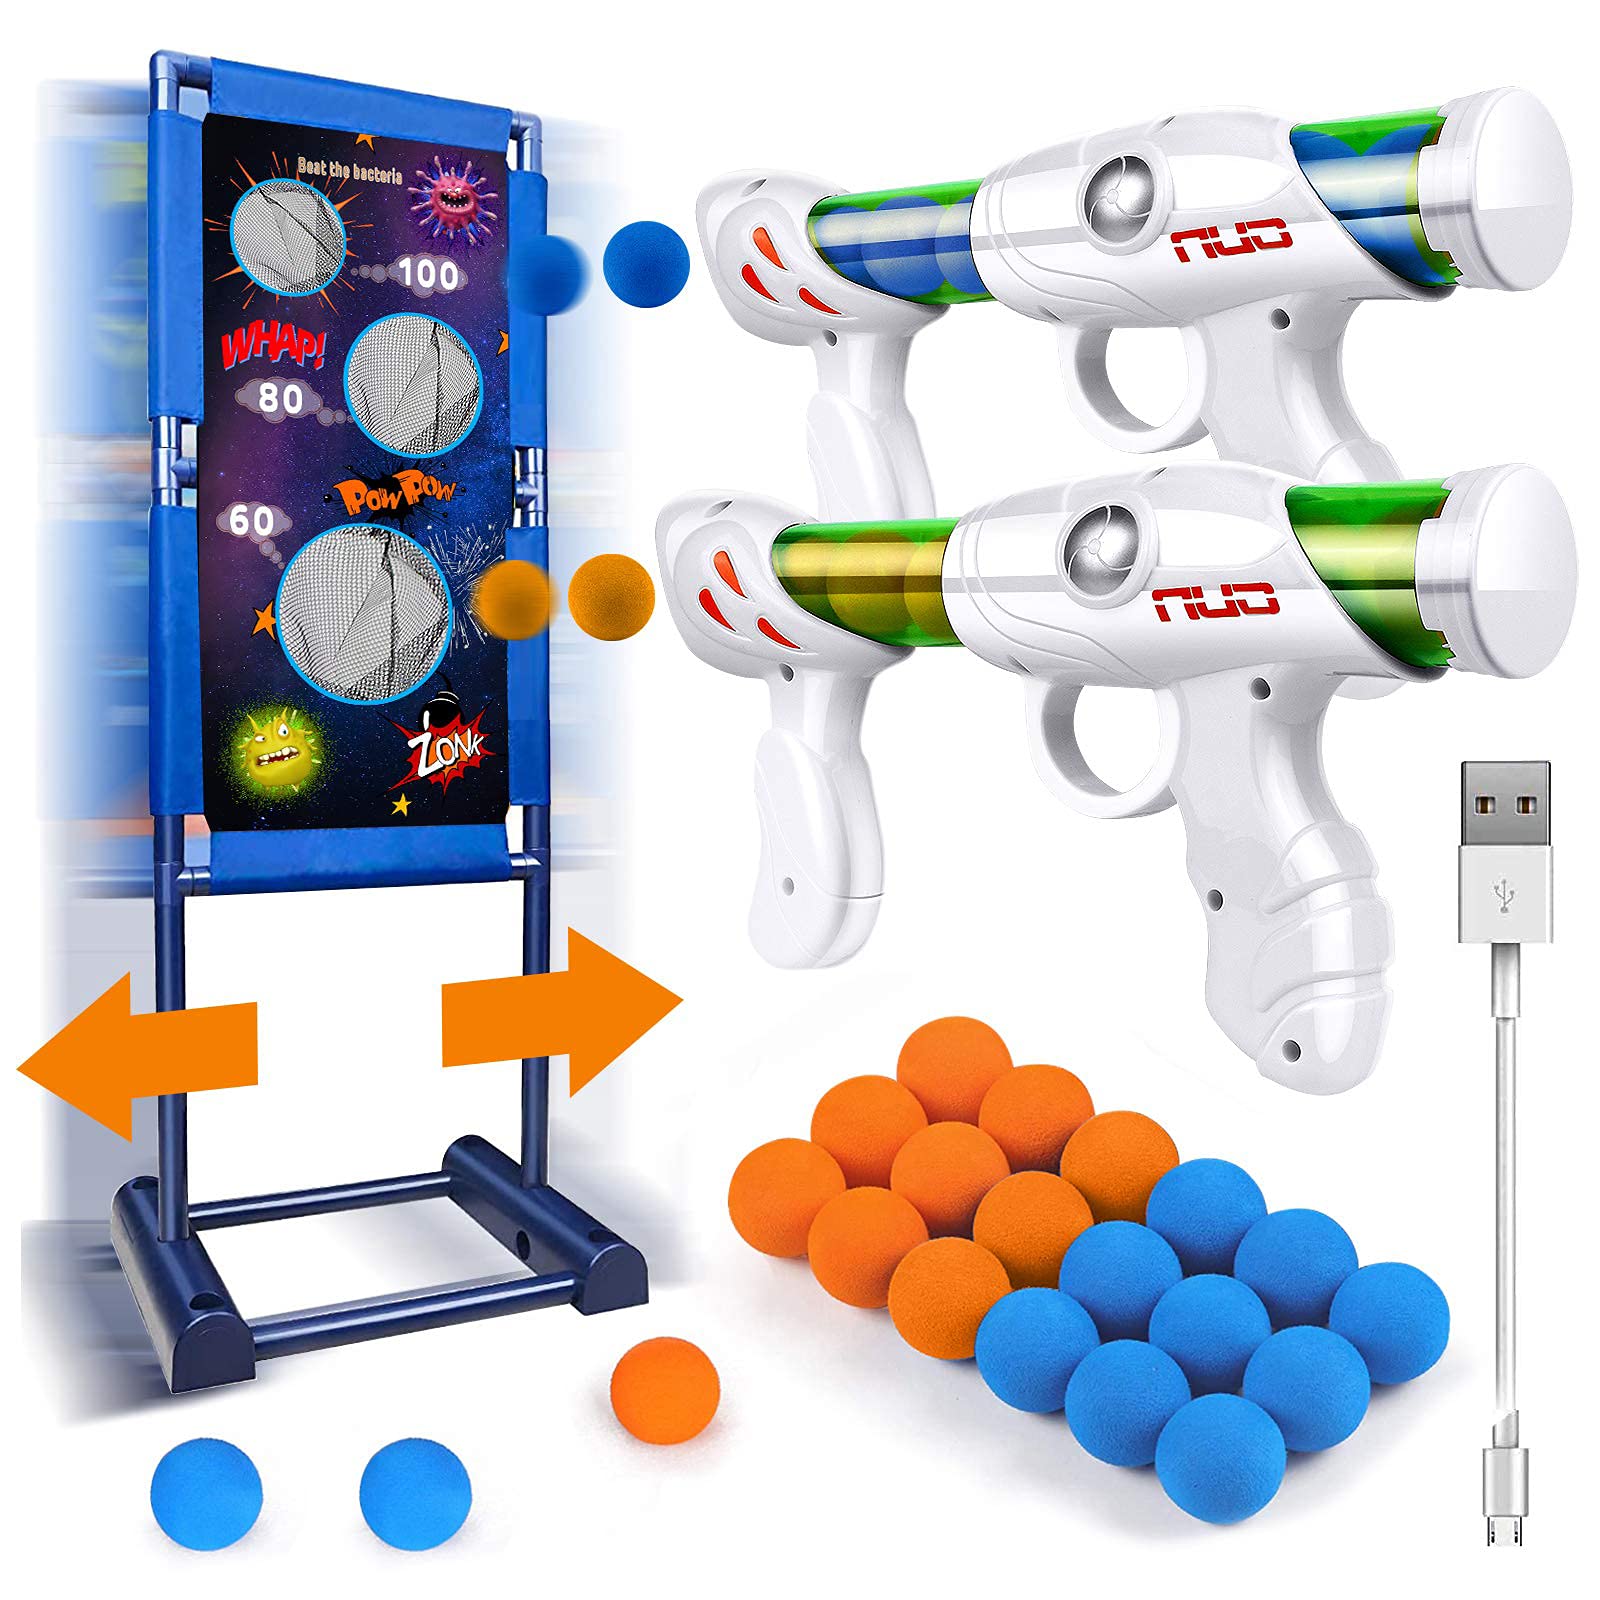 Kaufam Gun Toy Gift for Boys Age of 4 5 6 7 8 9 10 10+ Years Old Kids Girls for Birthday with Moving Shooting Target 2 Blaster Gun and 18 Foam Balls (Toy Gun Set)